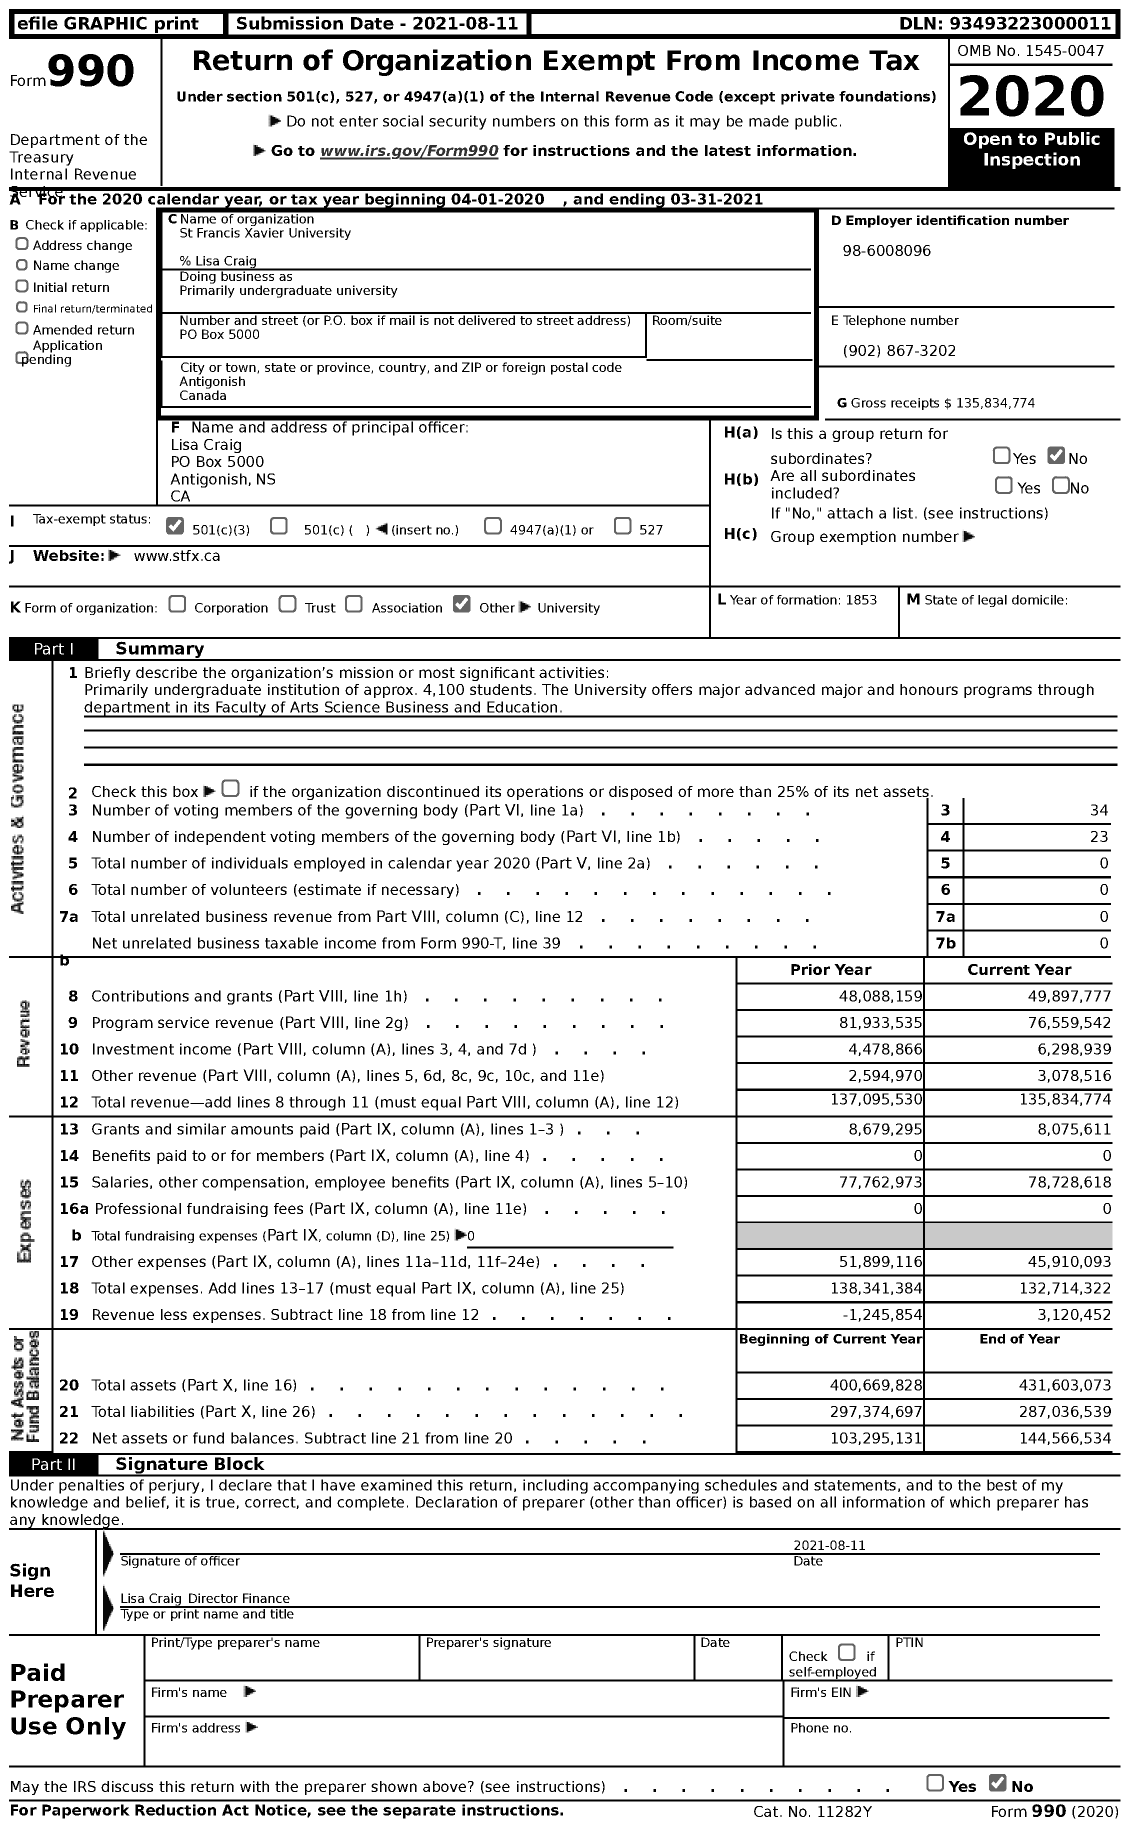 Image of first page of 2020 Form 990 for Primarily undergraduate university (StFX)